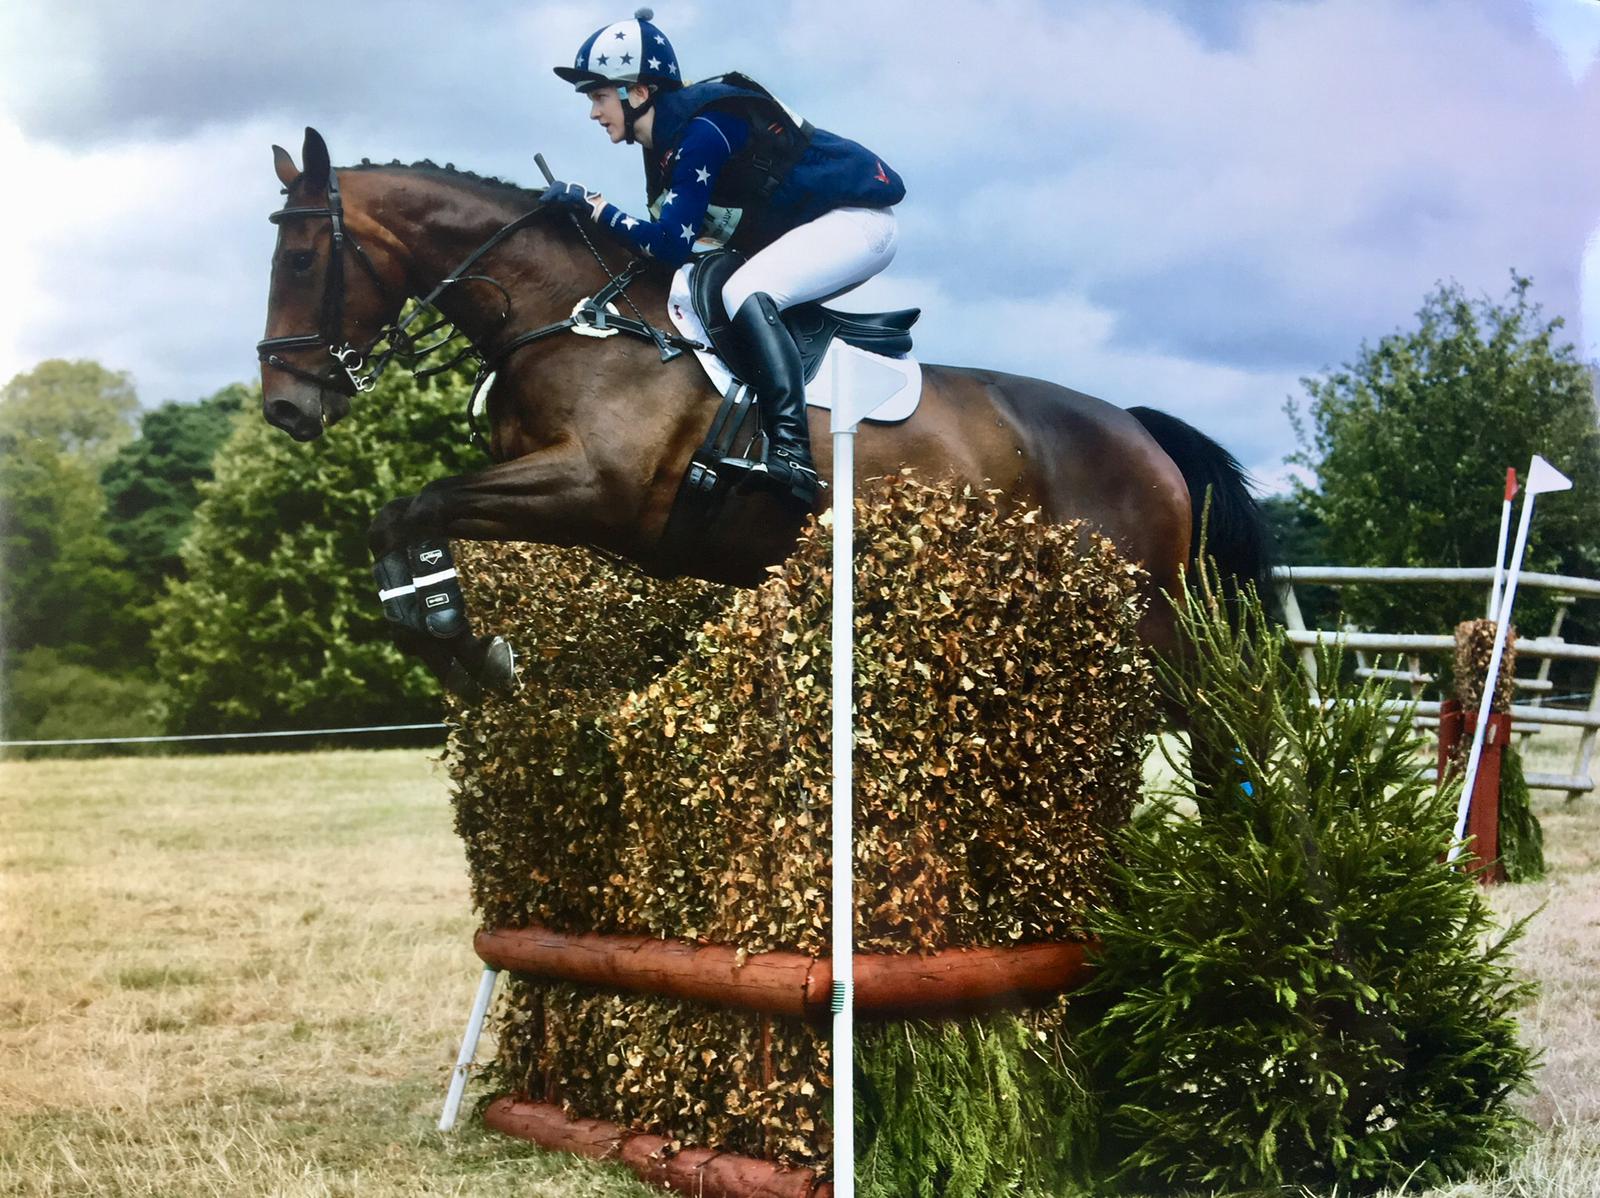 Eventing demands high levels of fitness